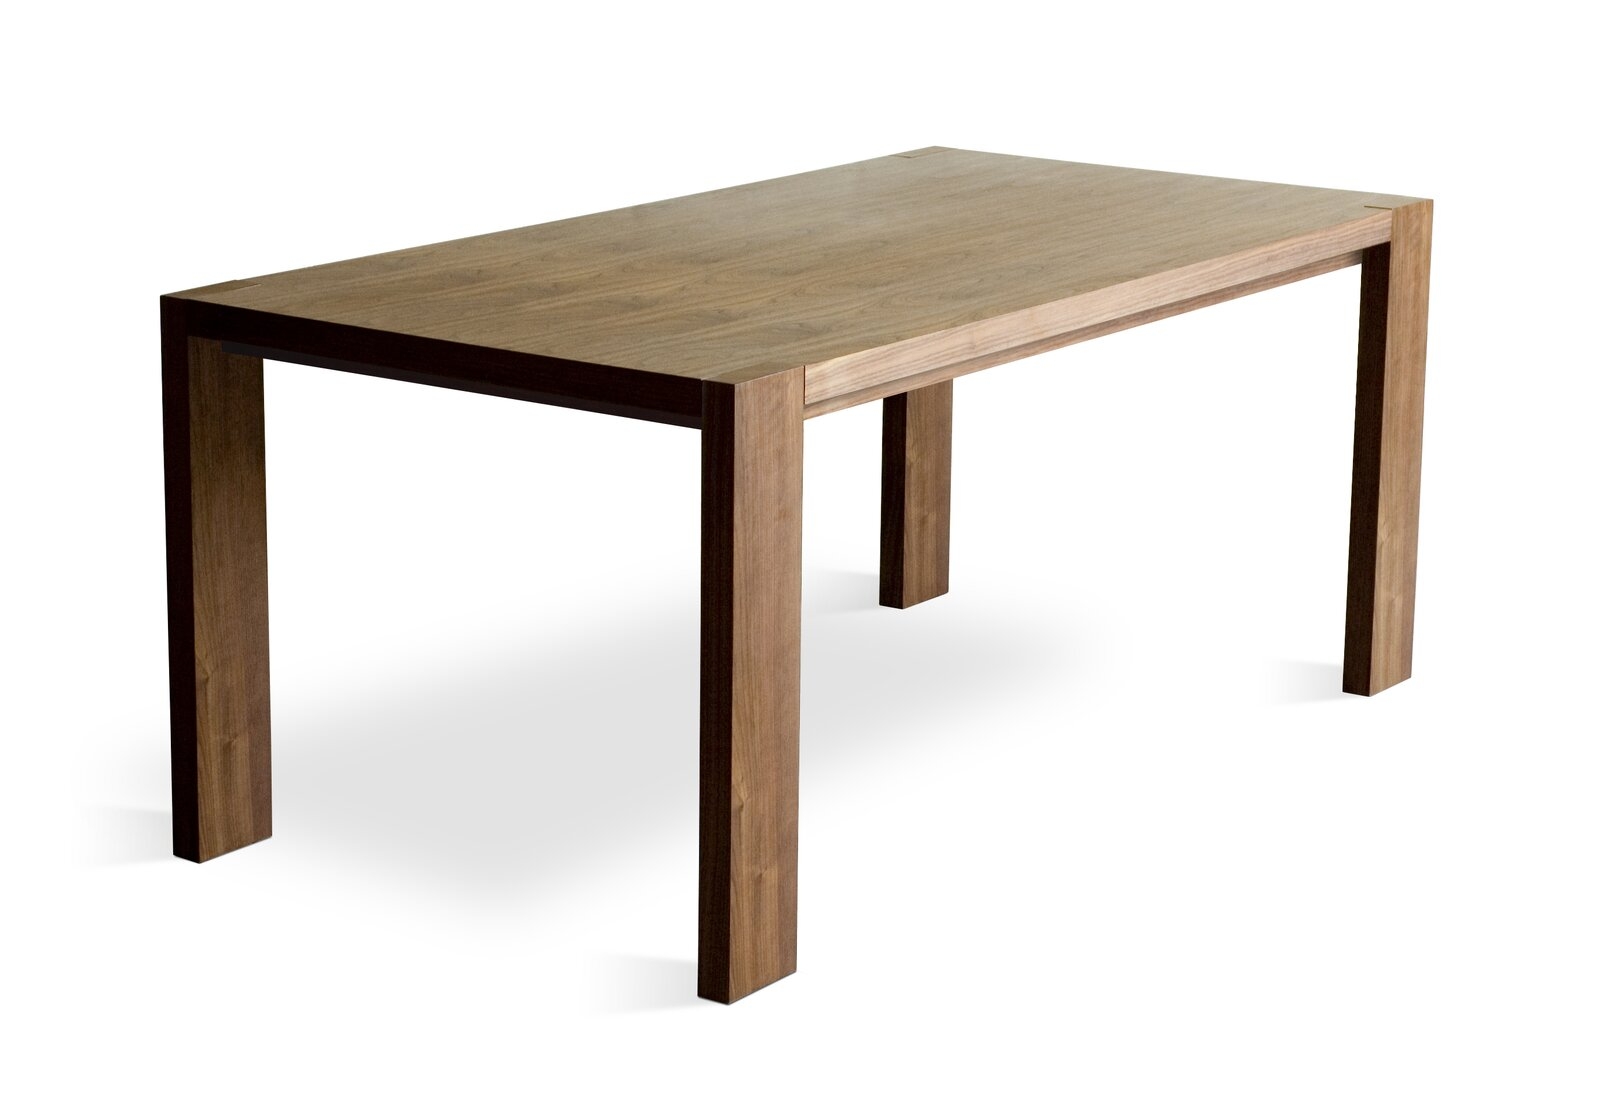 Gus* Modern Plank Dining Table Color: Walnut - Image 0